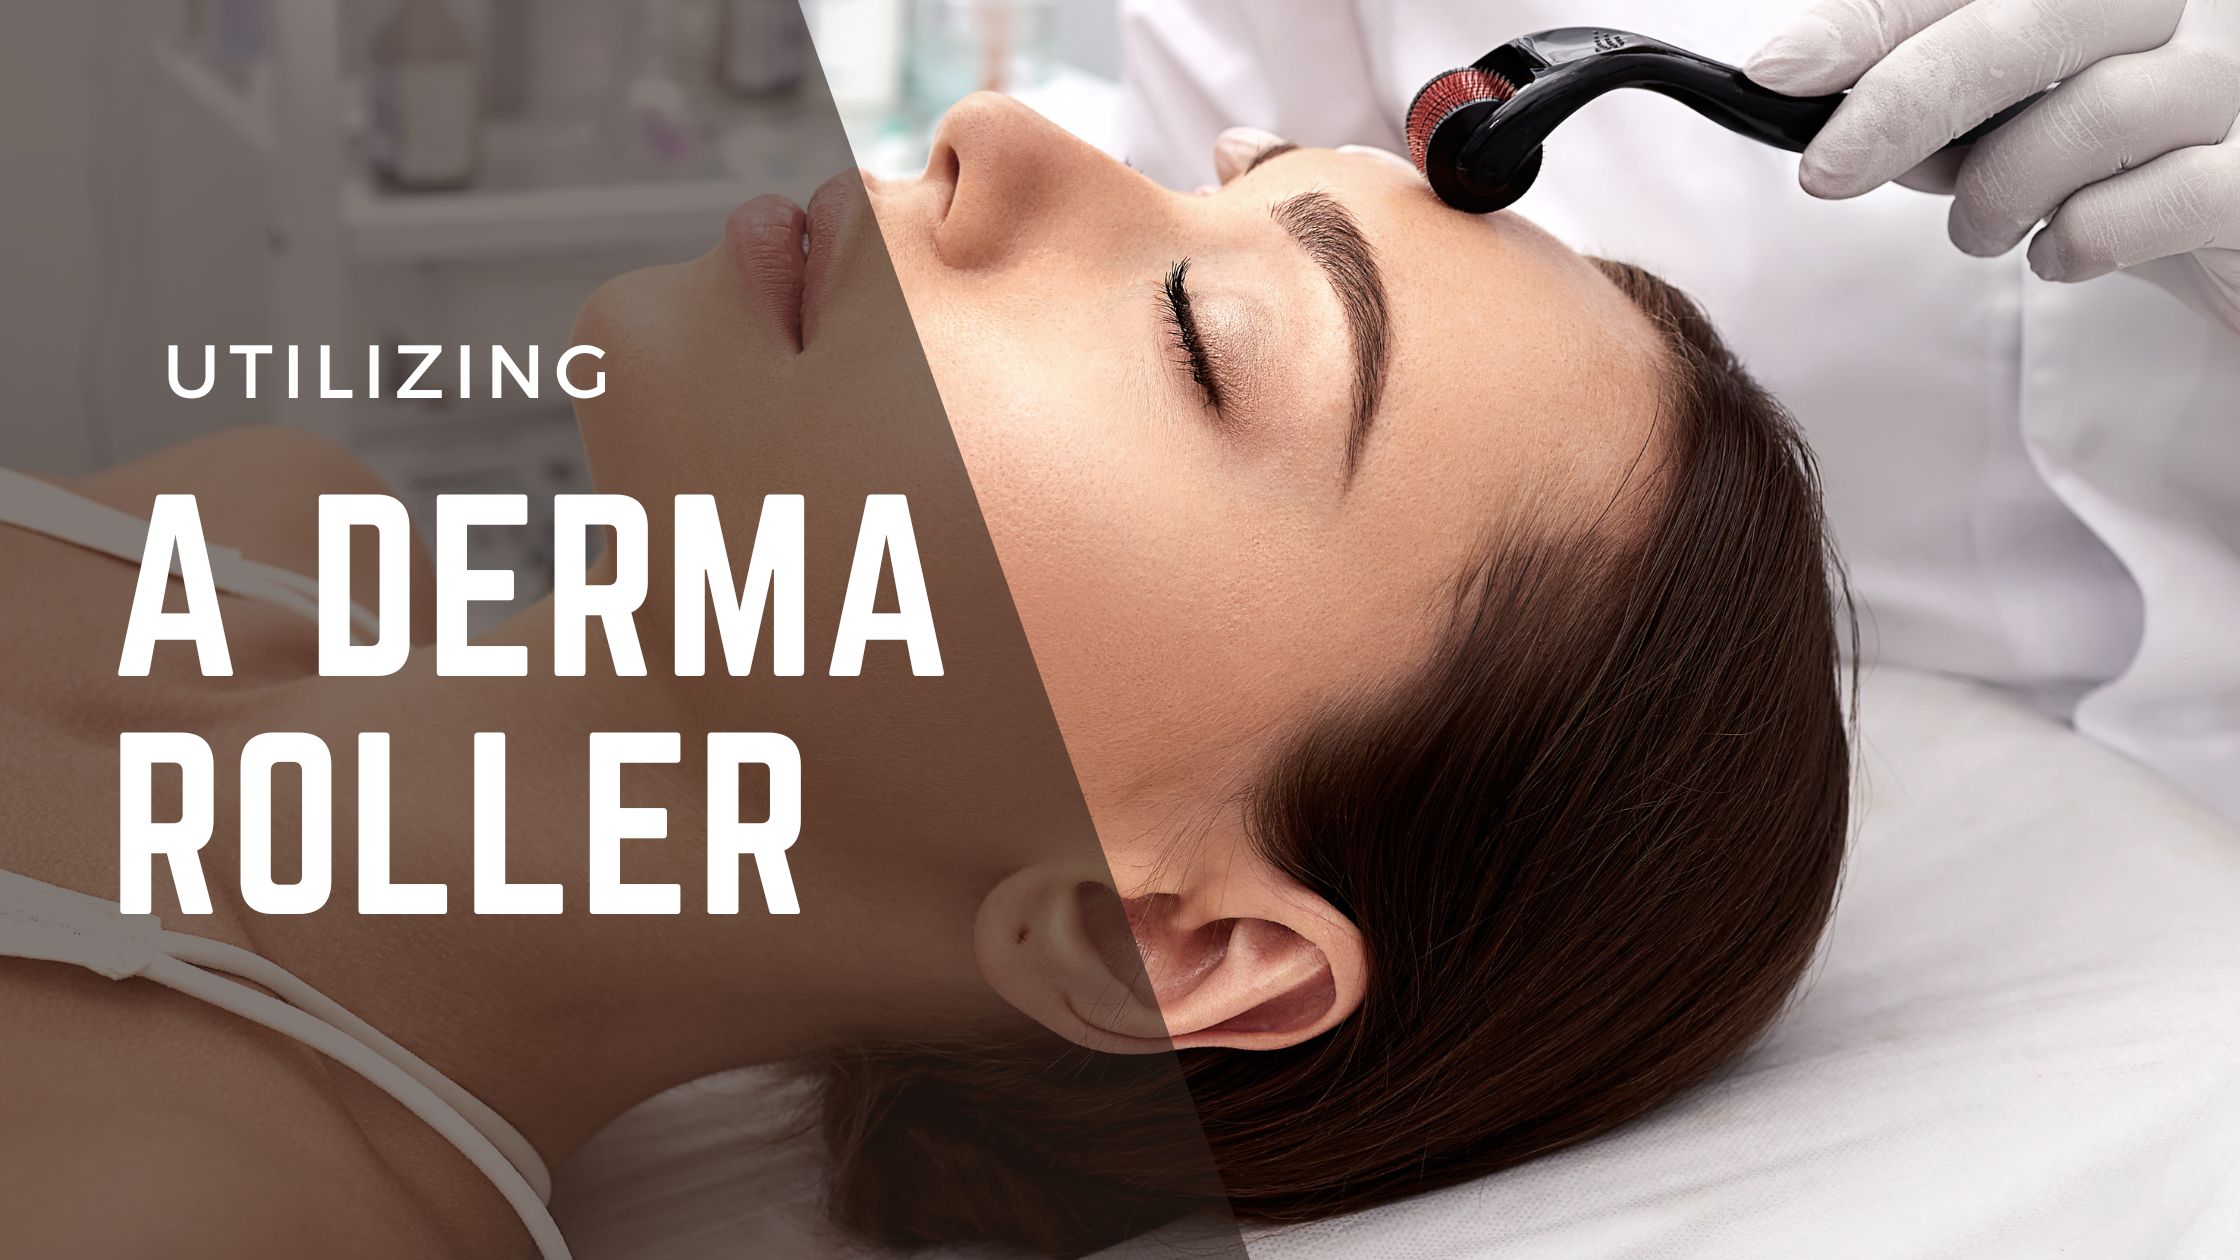 Derma Rolling at Home